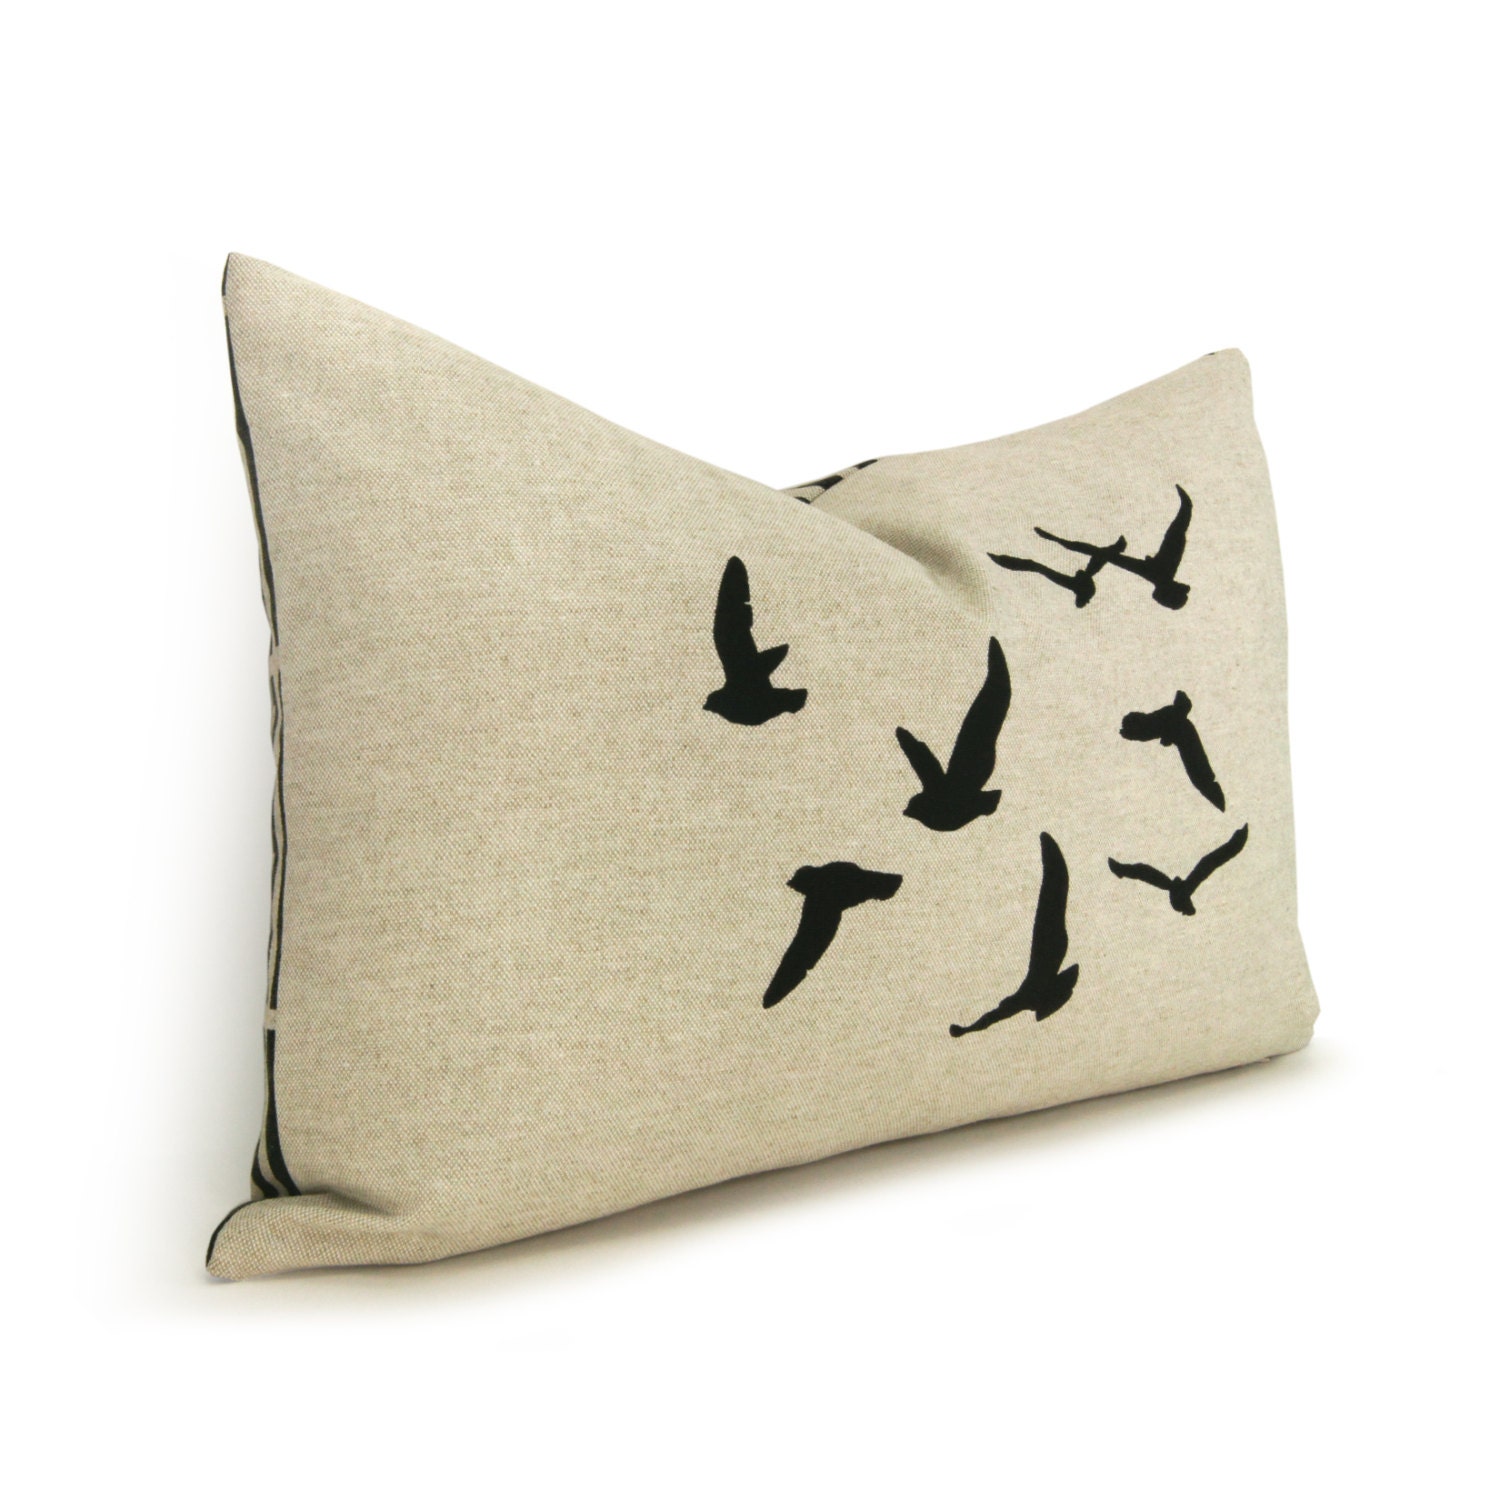 Bird pillow cover - Pillow cover - Nature print - Spring decor - Black flying birds silhouette on natural beige canvas with geometric back - ClassicByNature